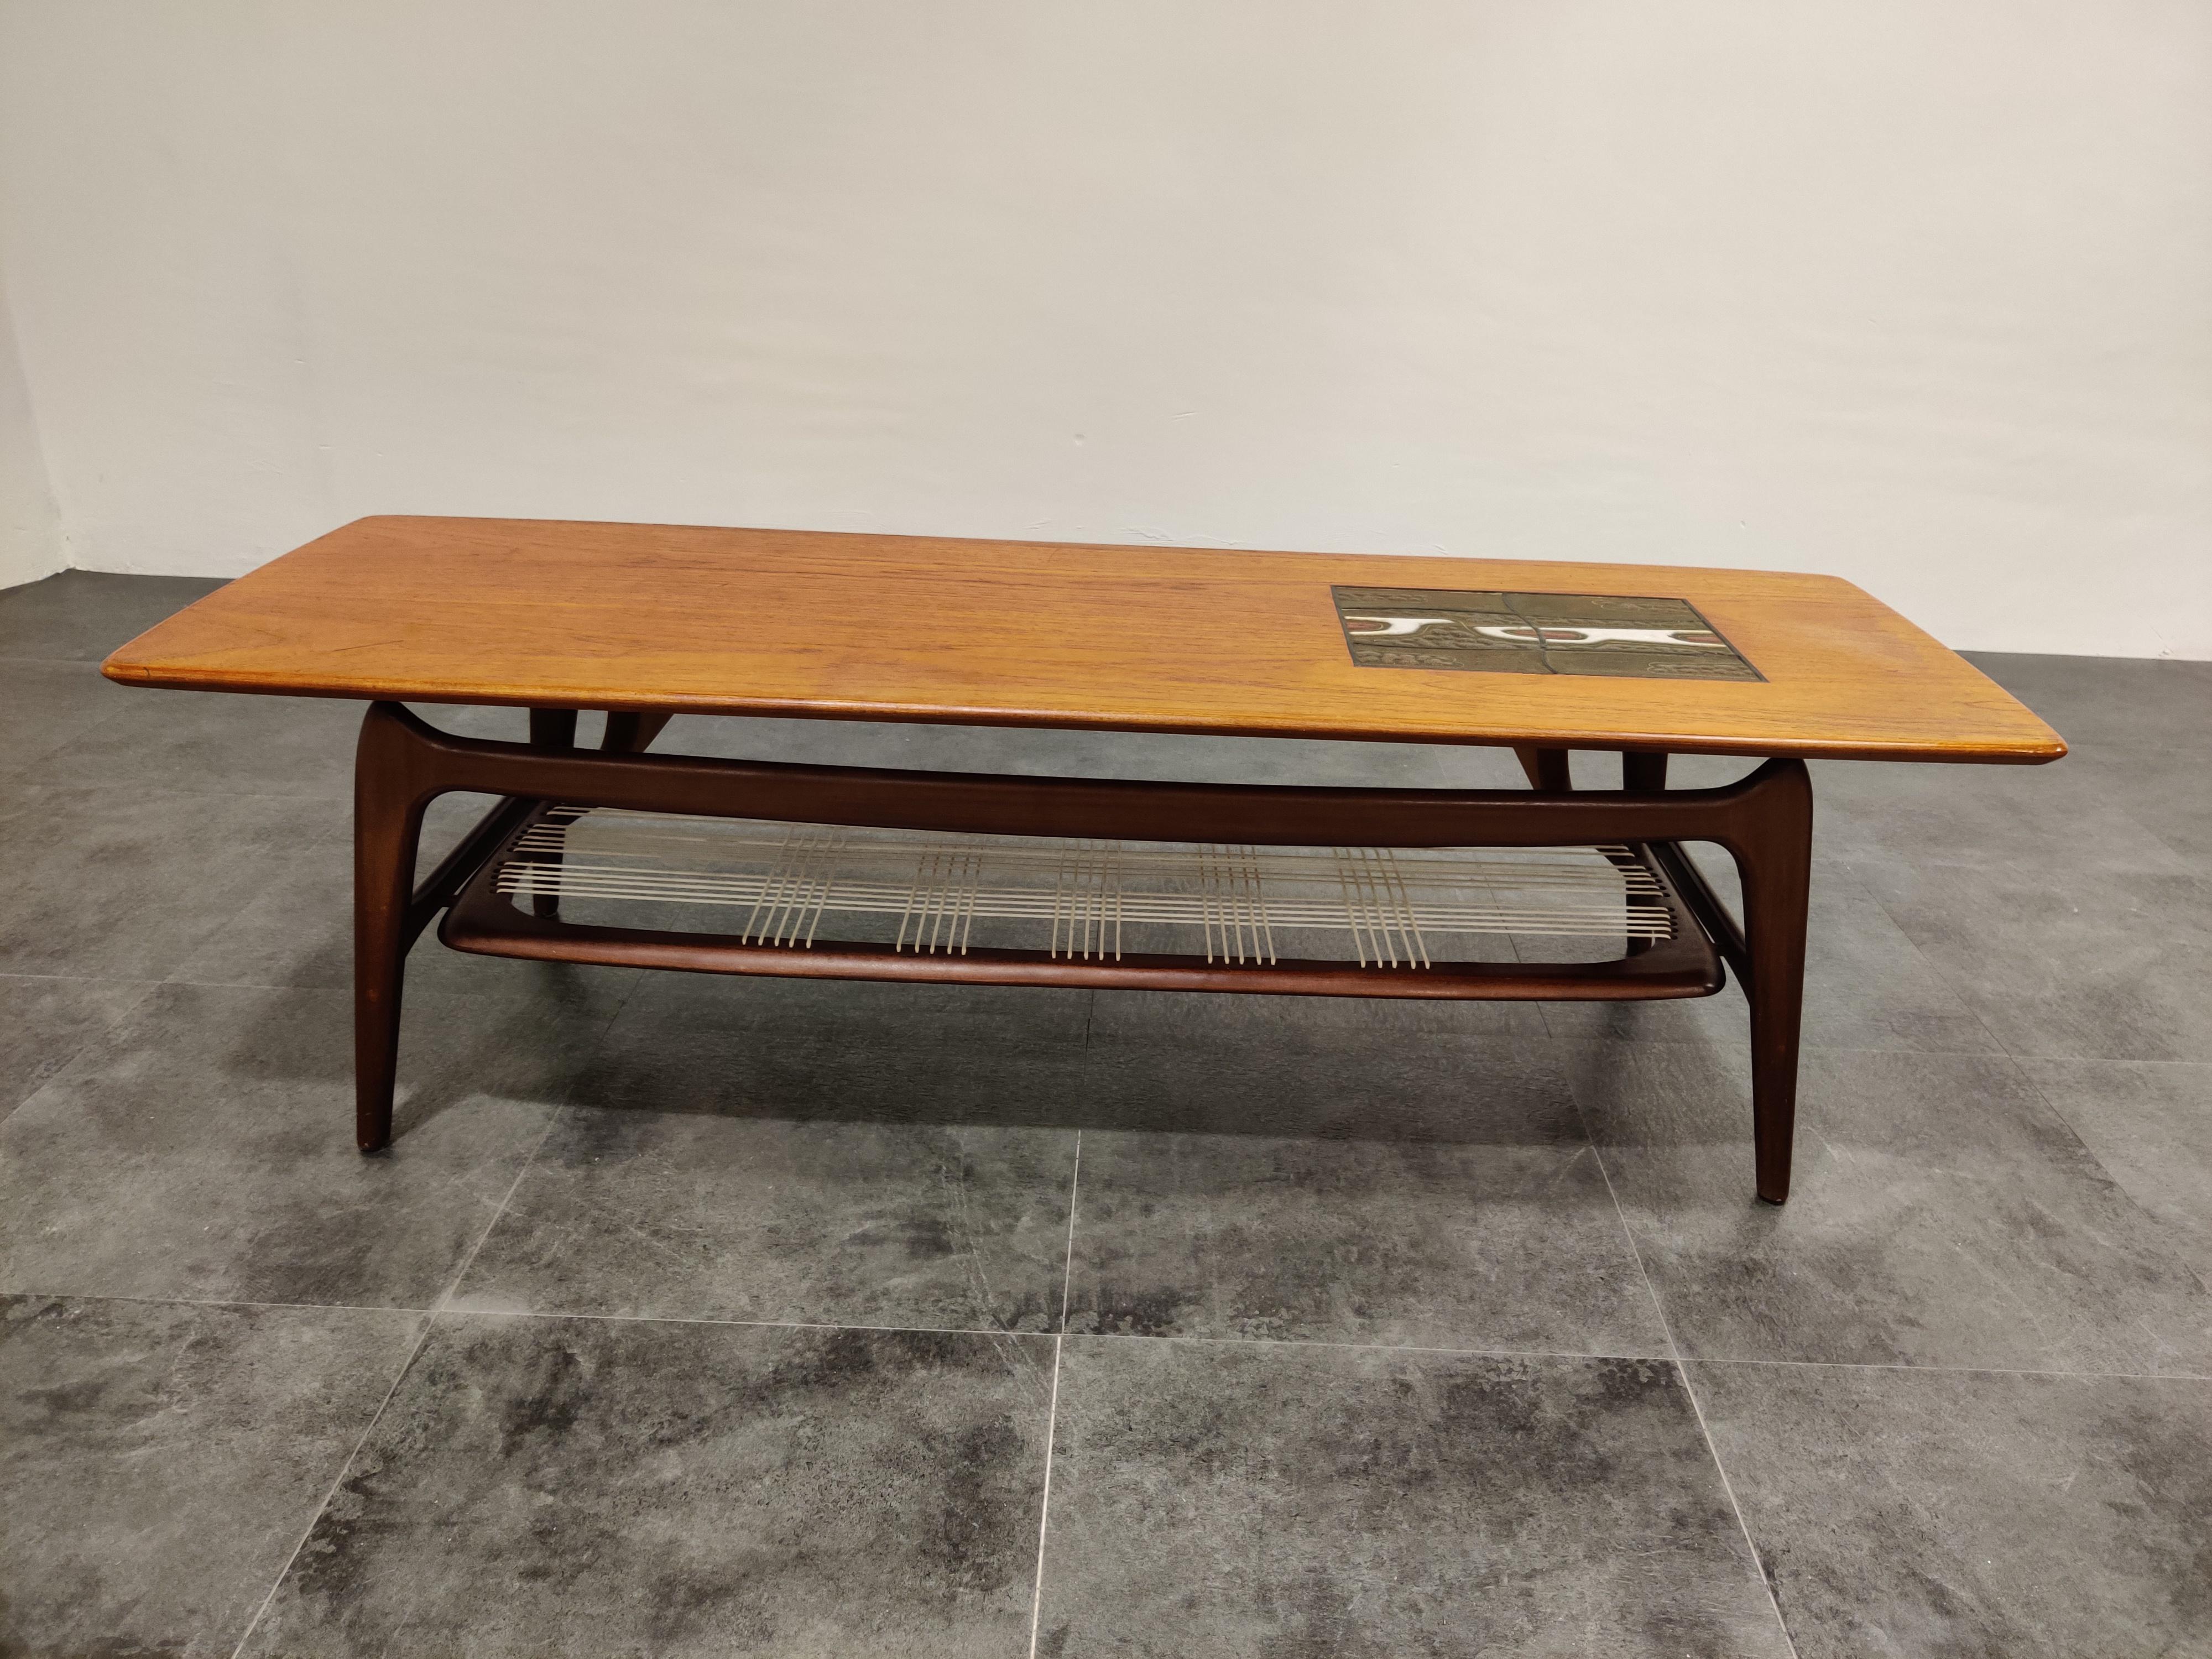 This organic coffee table was designed by Louis Van Teeffelen and manufactured by WEBE Meubel in the 1950s.

The table is made of teak, with ceramic details on the top designed by ceramist J. Ravelli. Cord webbing to store magazines.

Minor